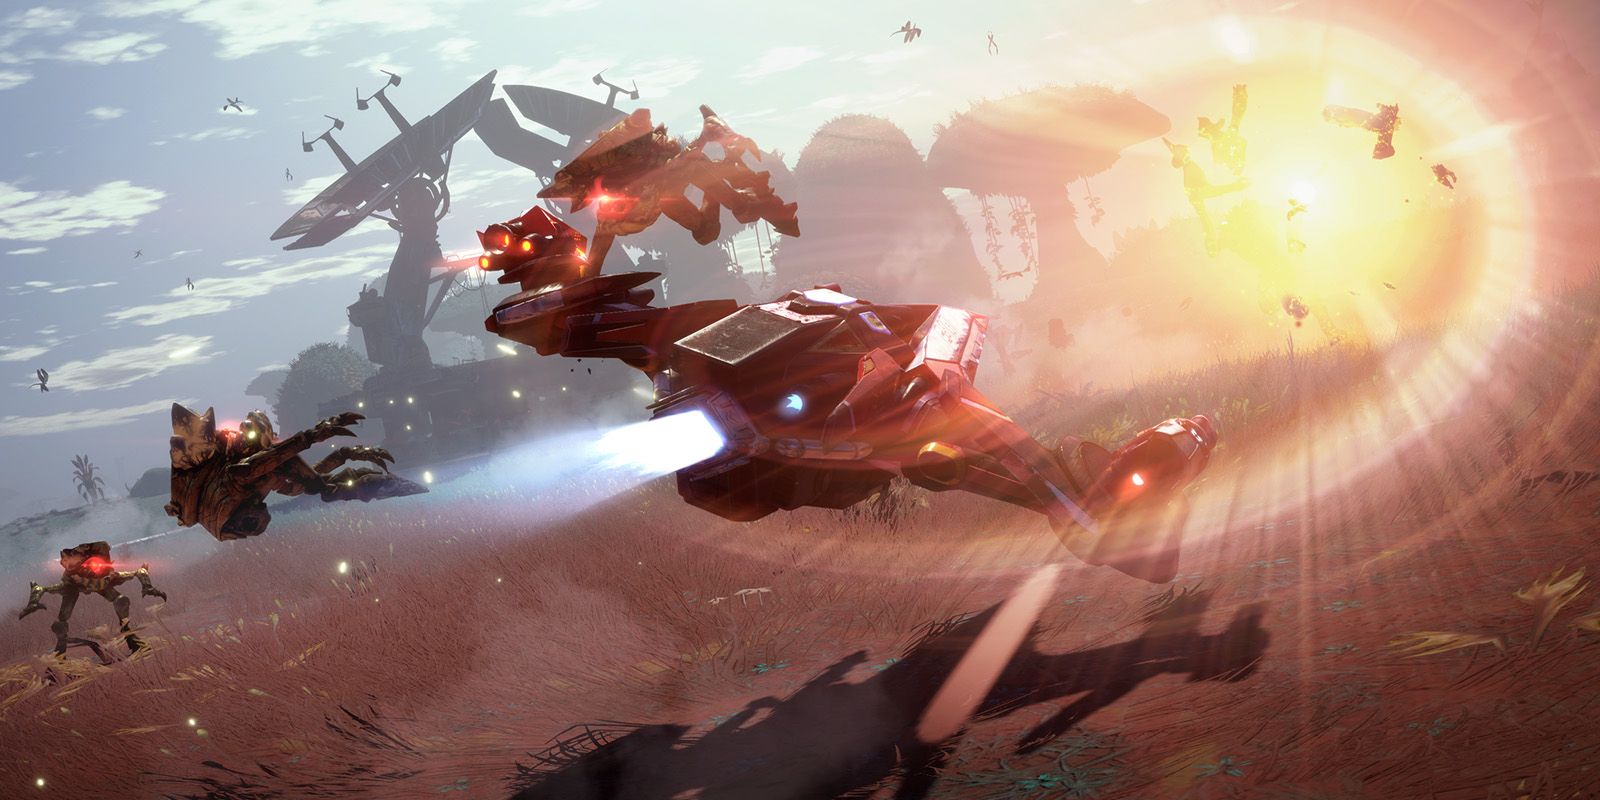 Fighter ship in mid-combat in Starlink: Battle For Atlas (2018)